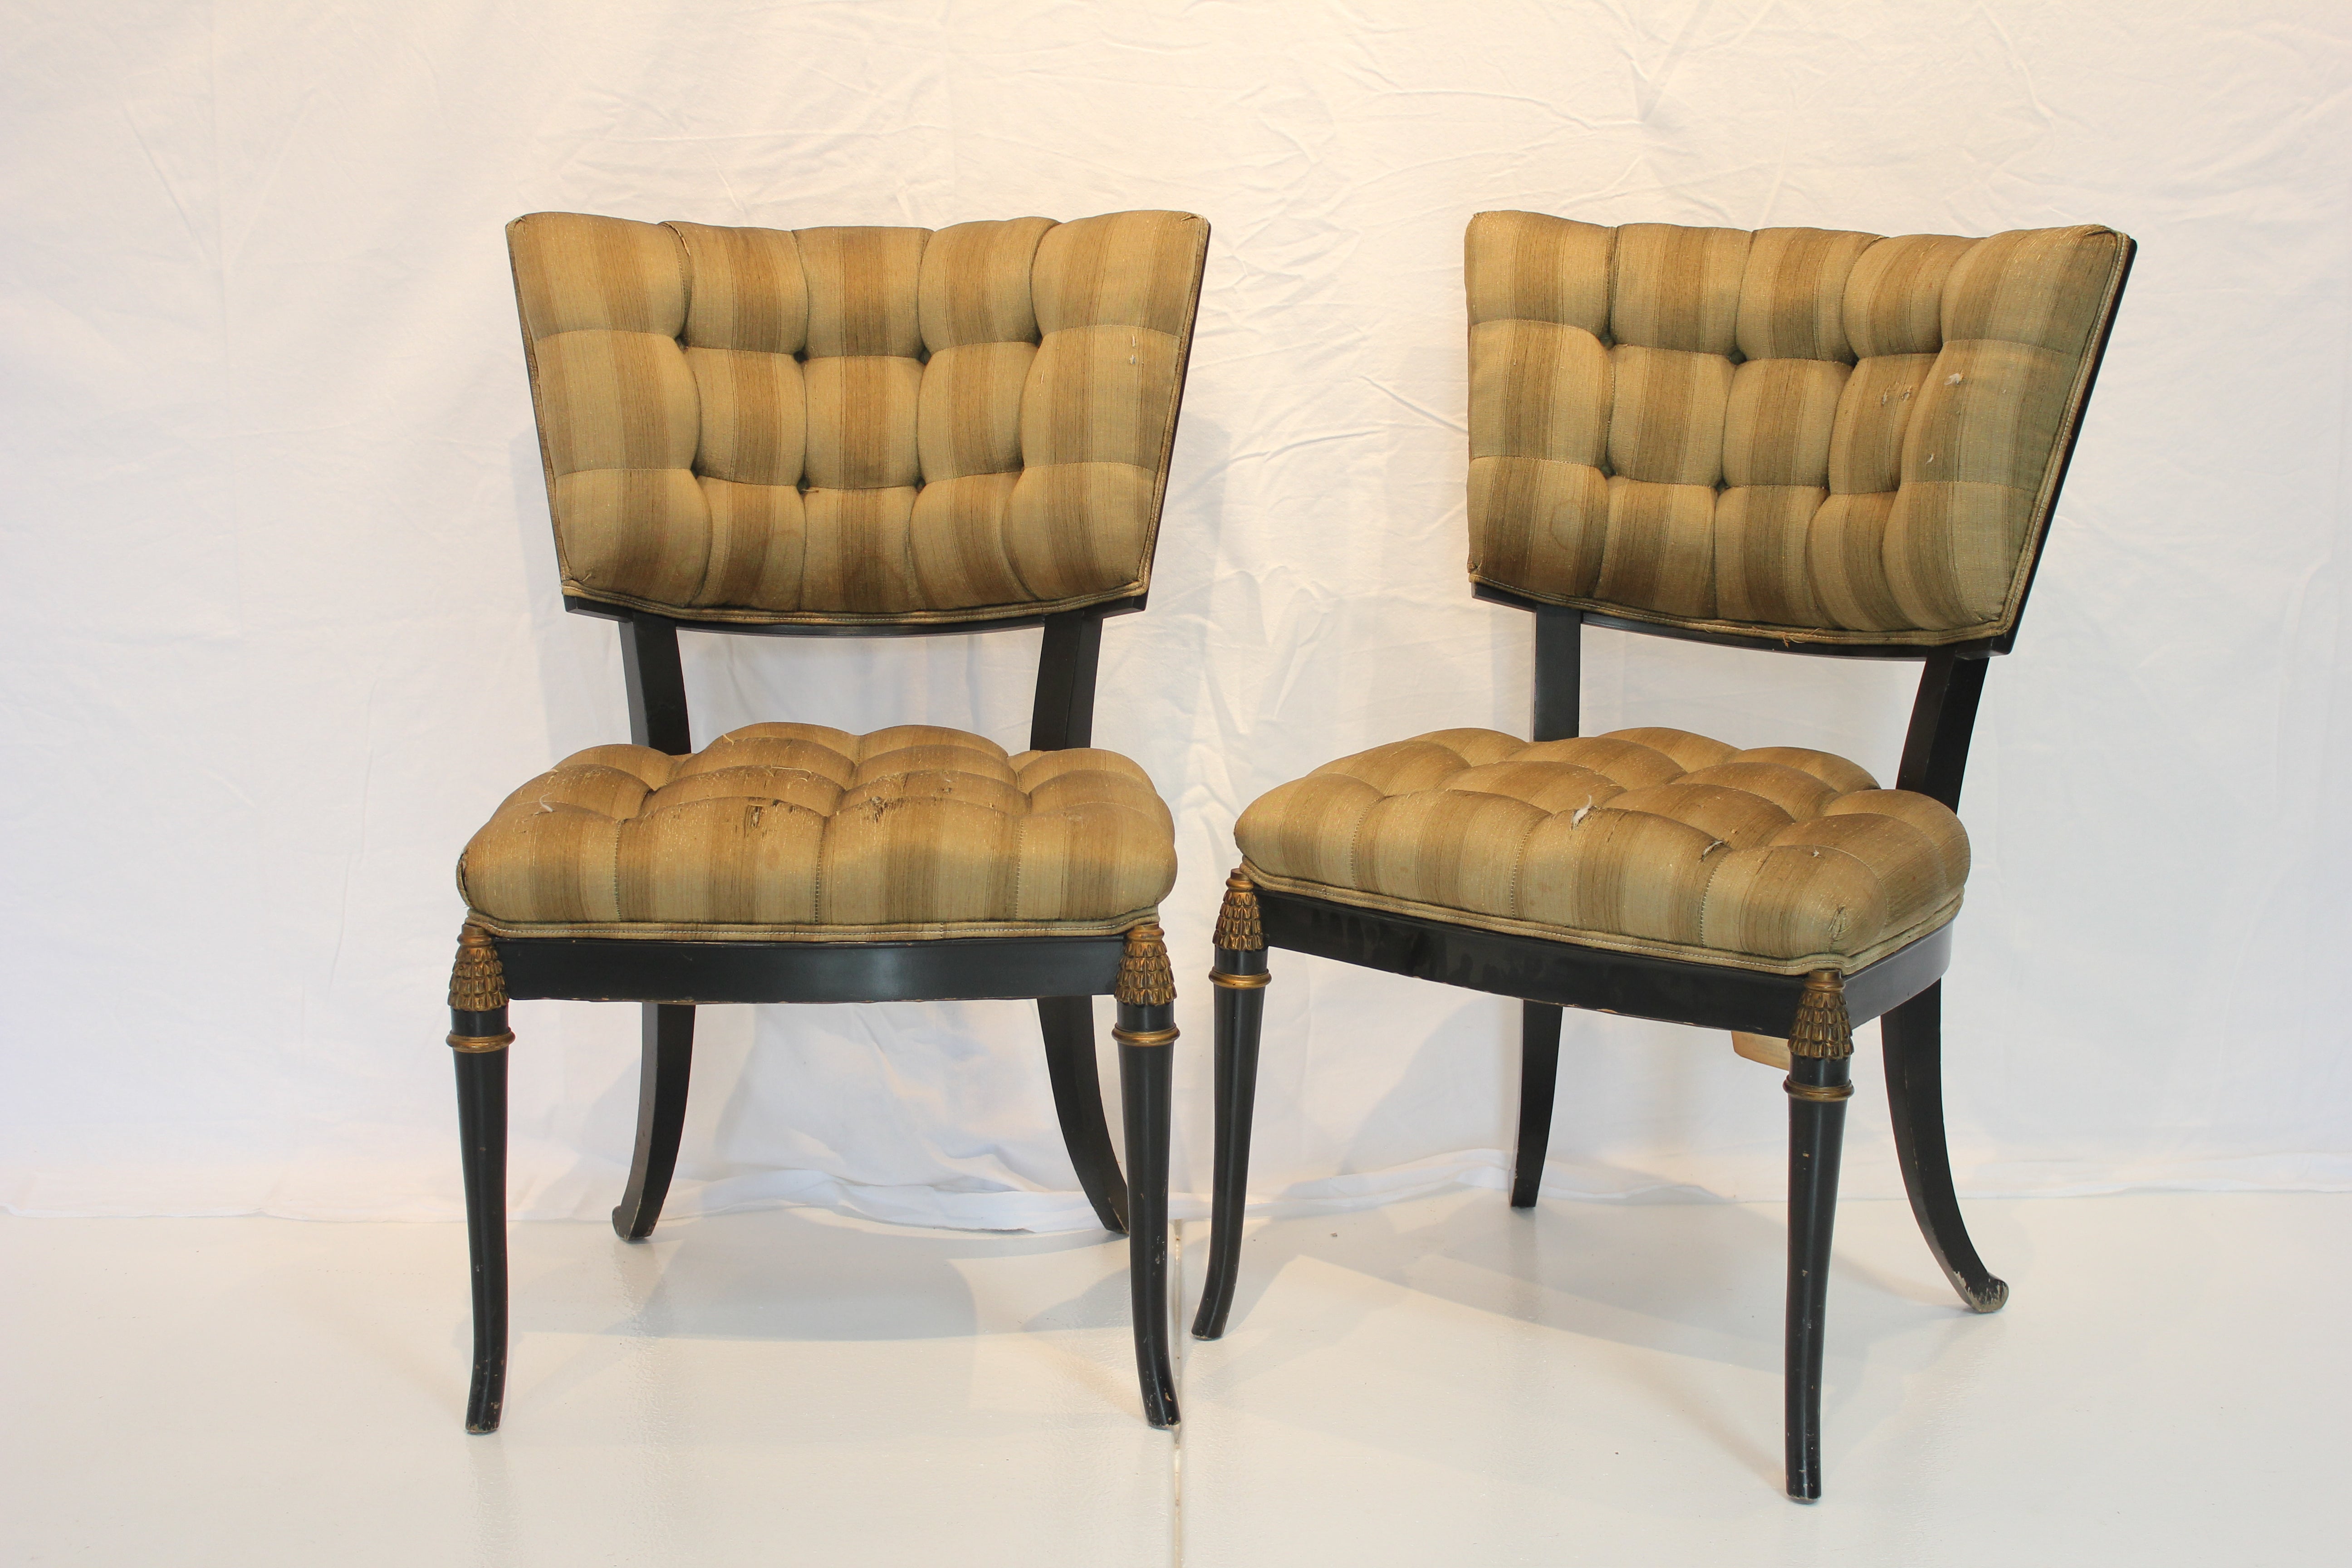 AF2-313: Vintage Pair of mid 20th Century Hollywood Regency Style Side Chairs (Needing New Upholstery)